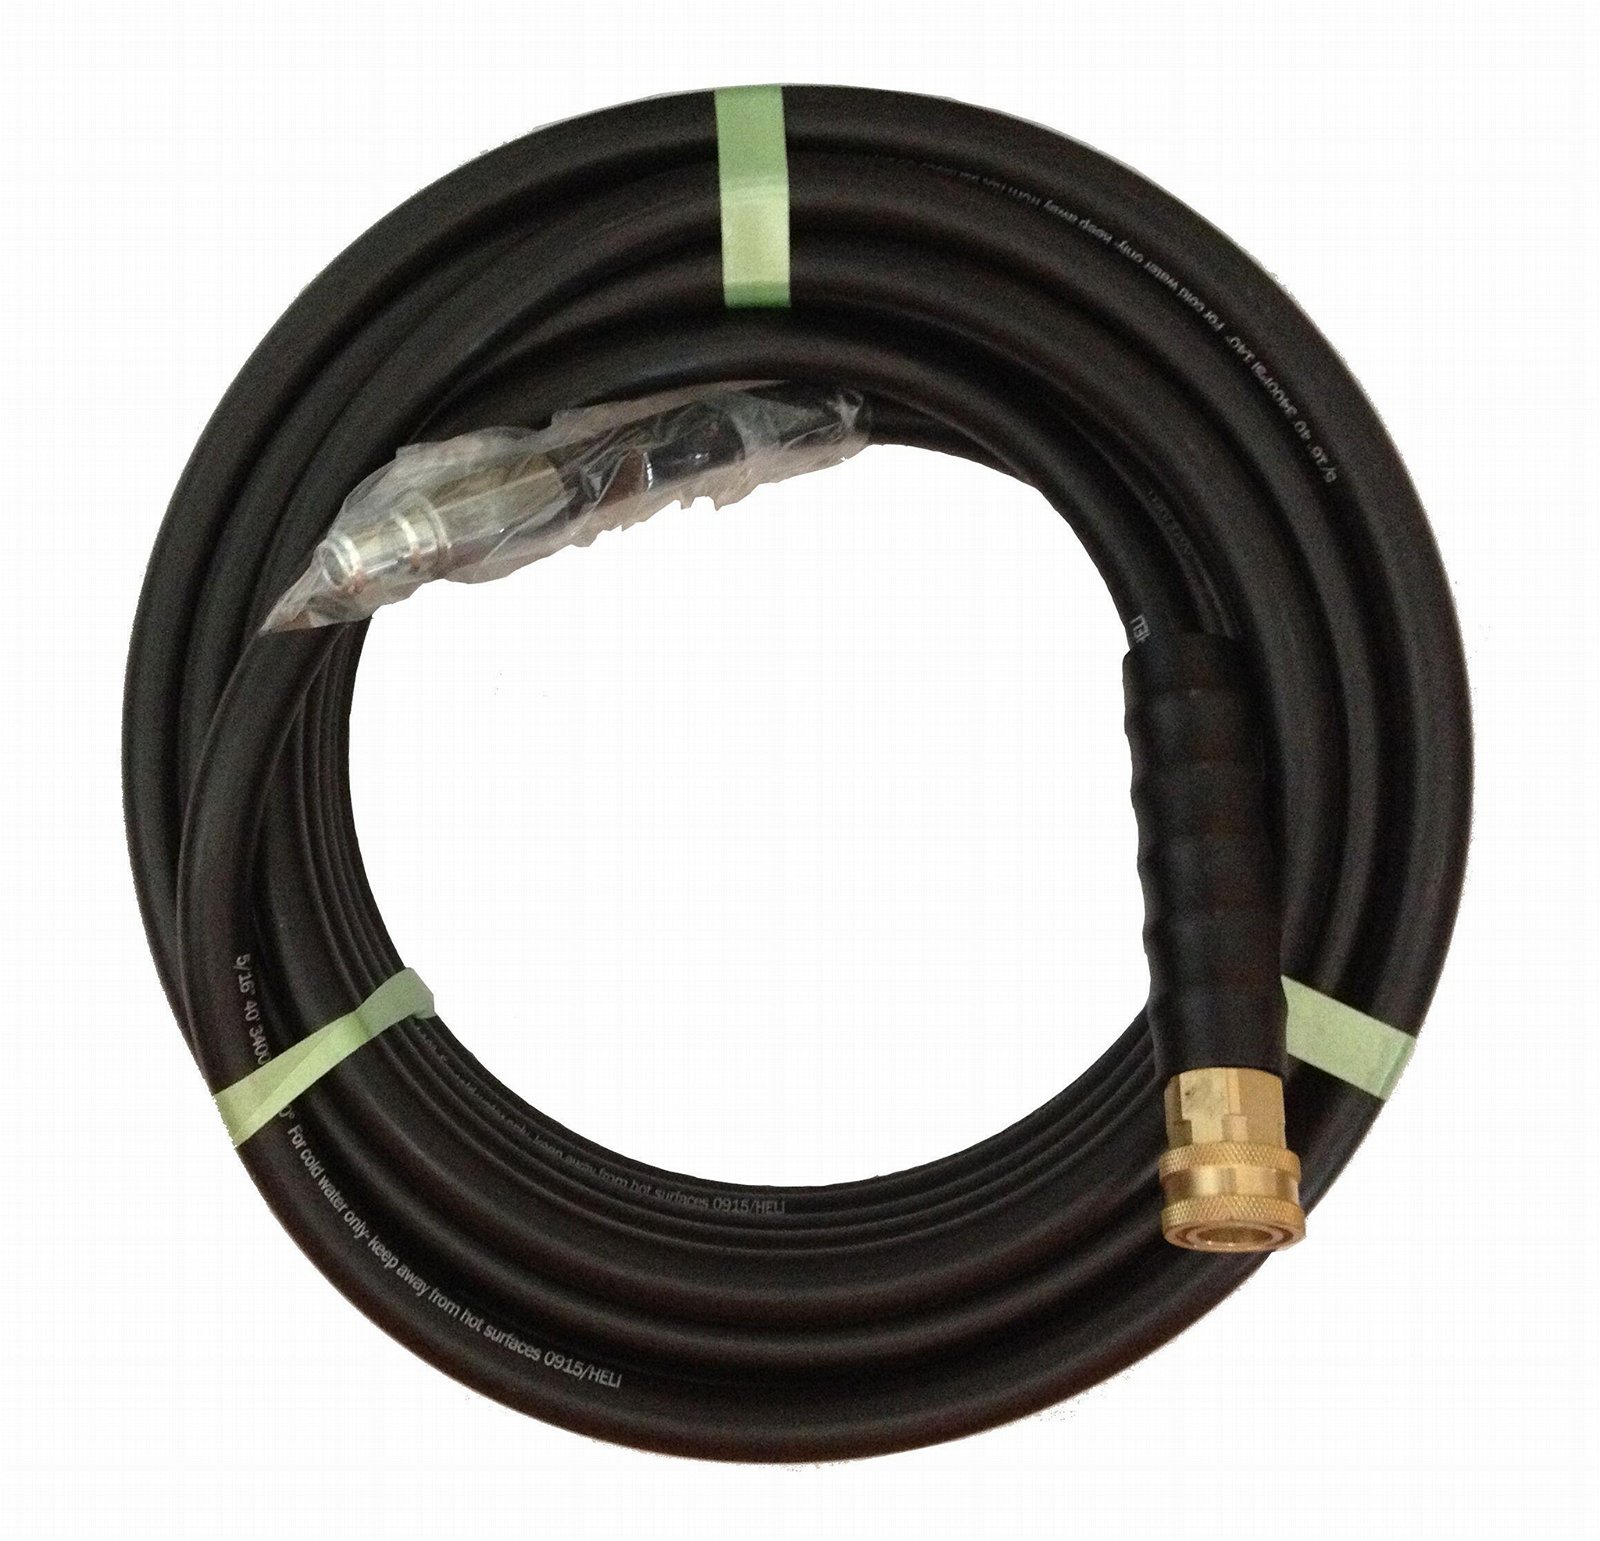 Black high pressure washing car equipment hose with quick connect fittings  3